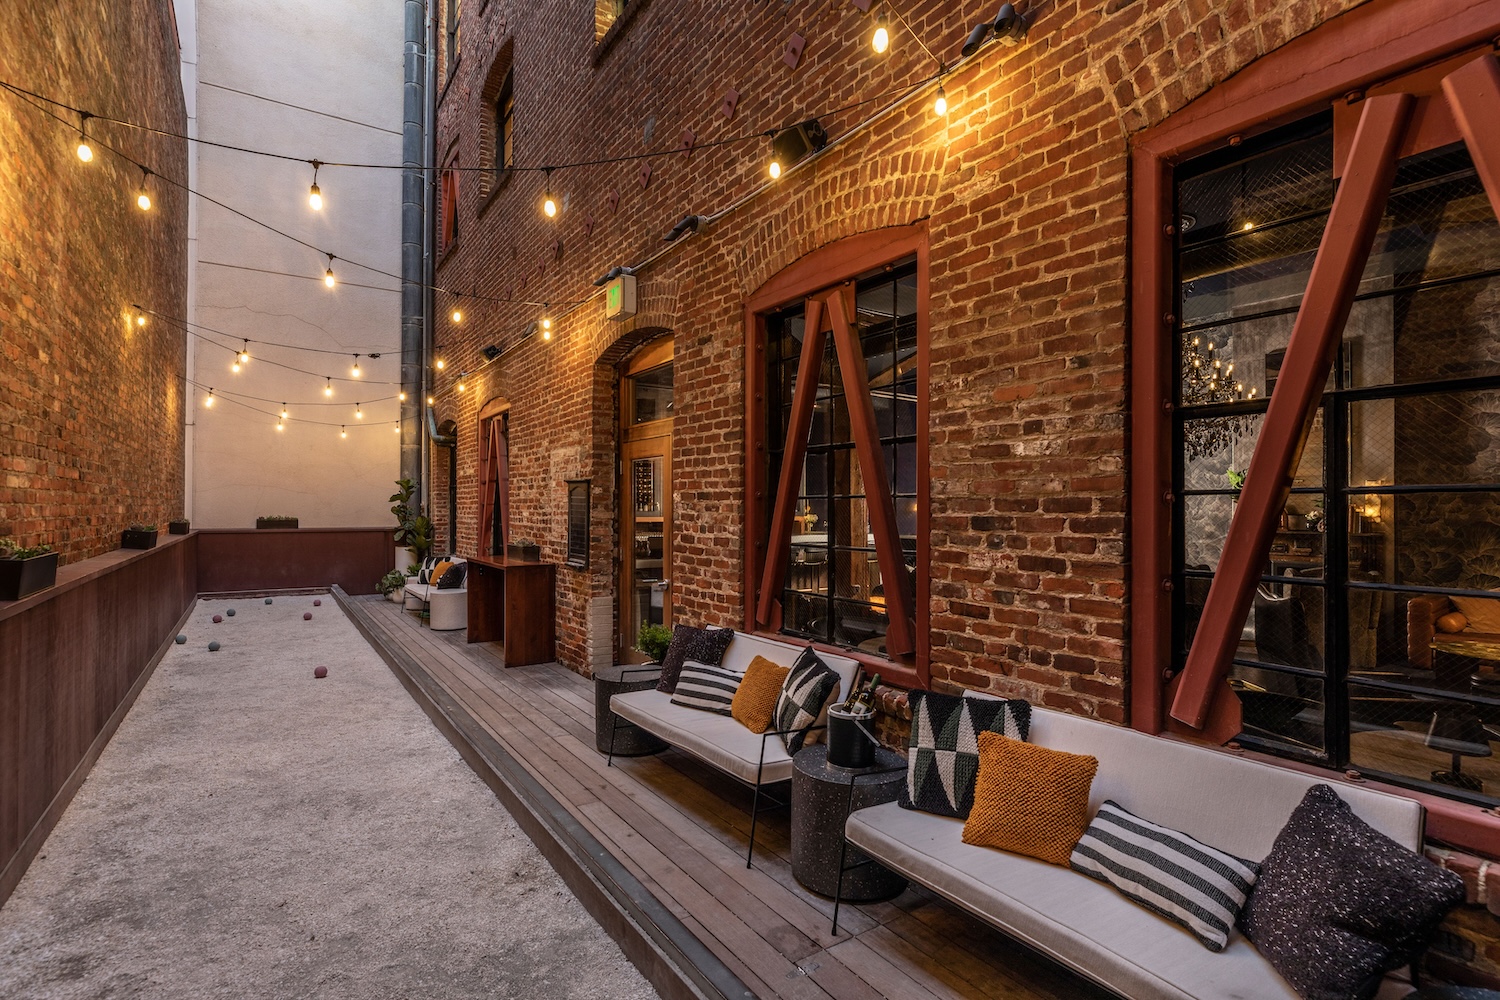 couches with throw pillows, windows, fairy lights, exposed brick